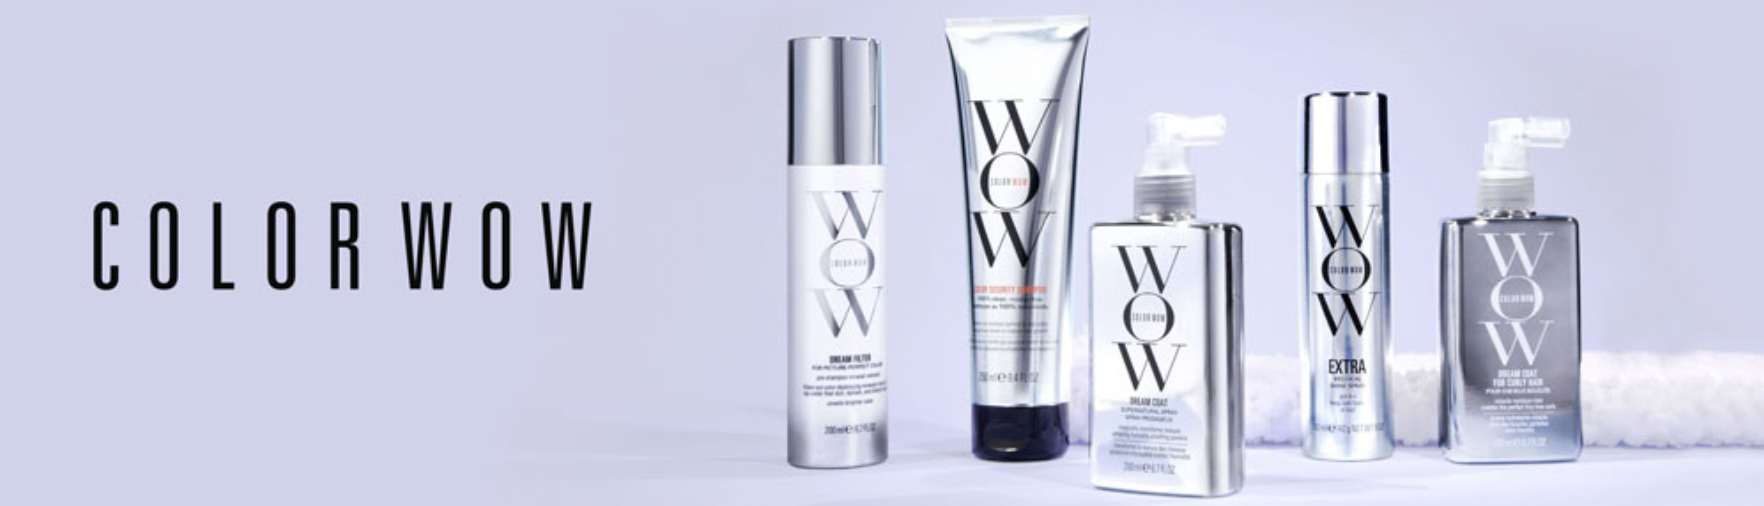 Colorwow promotional banner showing 5 products from the range